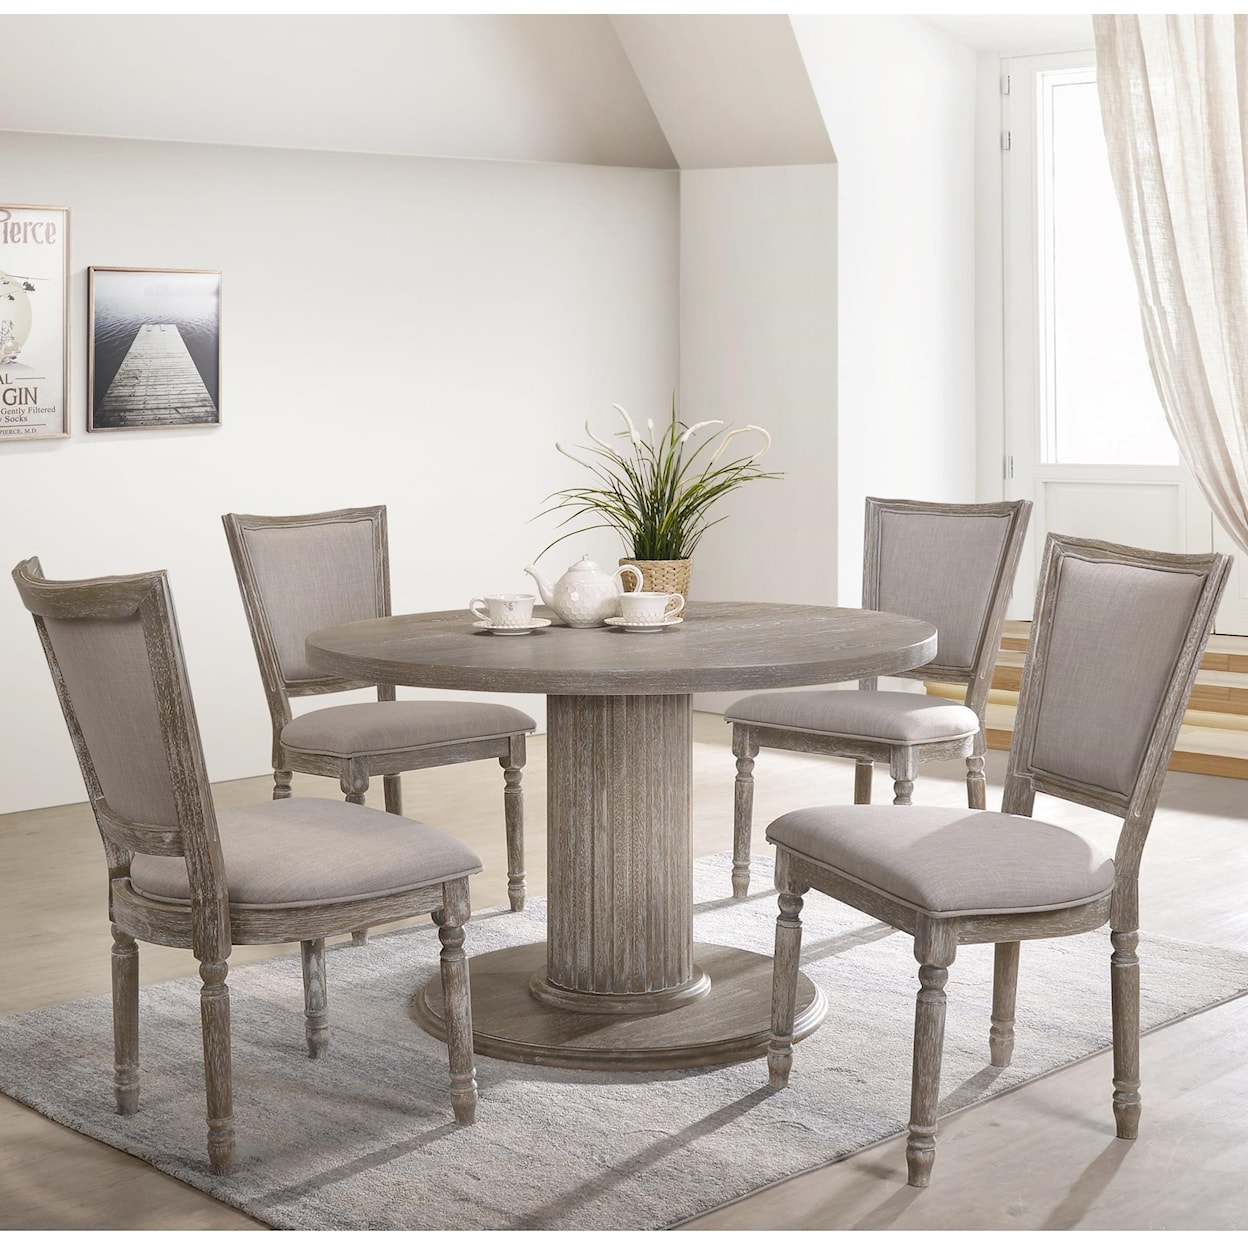 Acme Furniture Gabrian Round Table and Chair Set